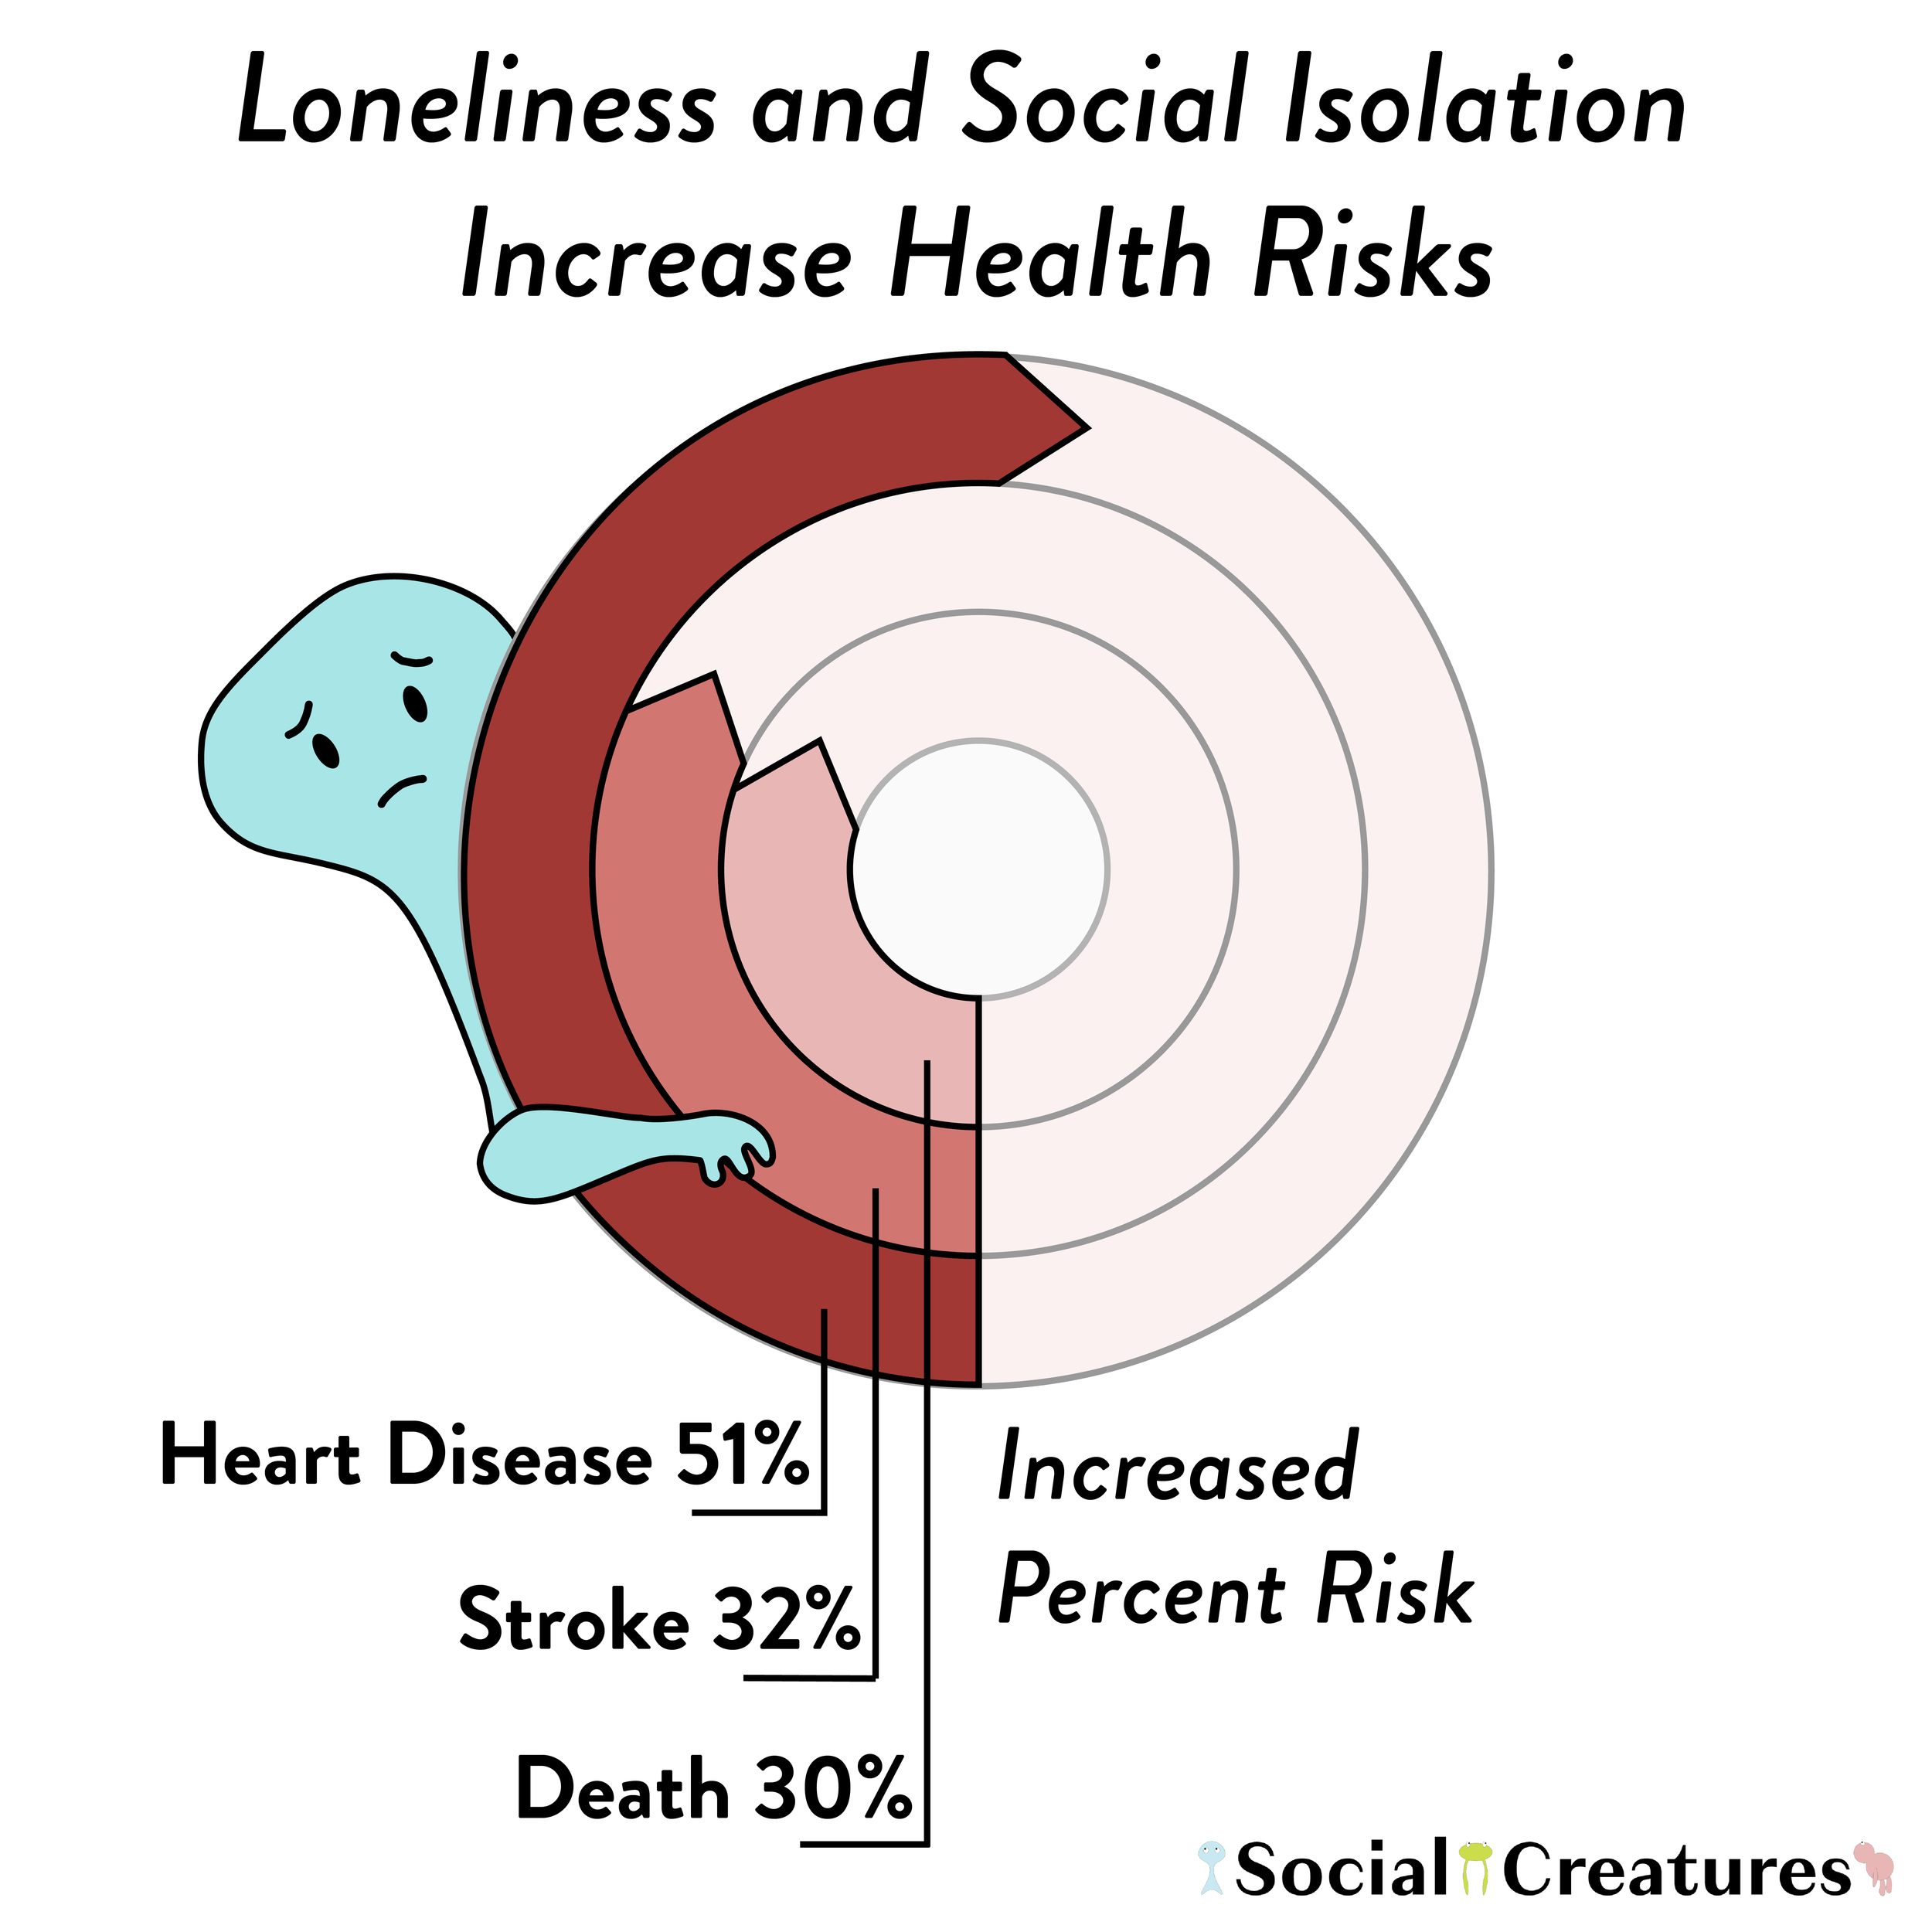 Health Risks of Social Isolation and Loneliness